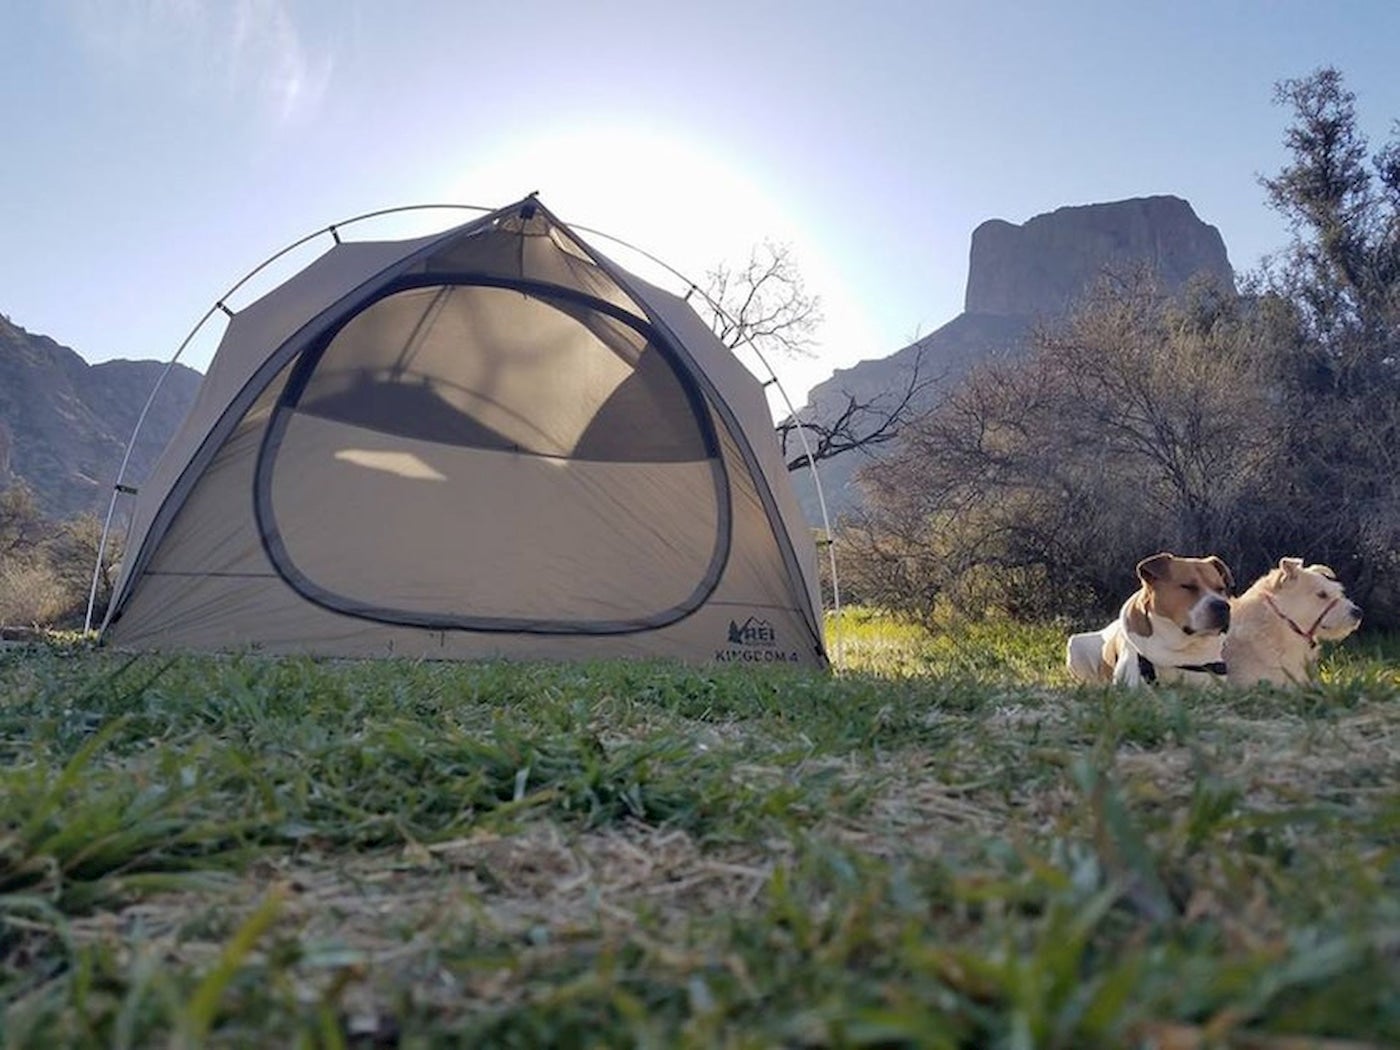 Tent set up on grass below large cliff face and beside two dogs in Big Bend.